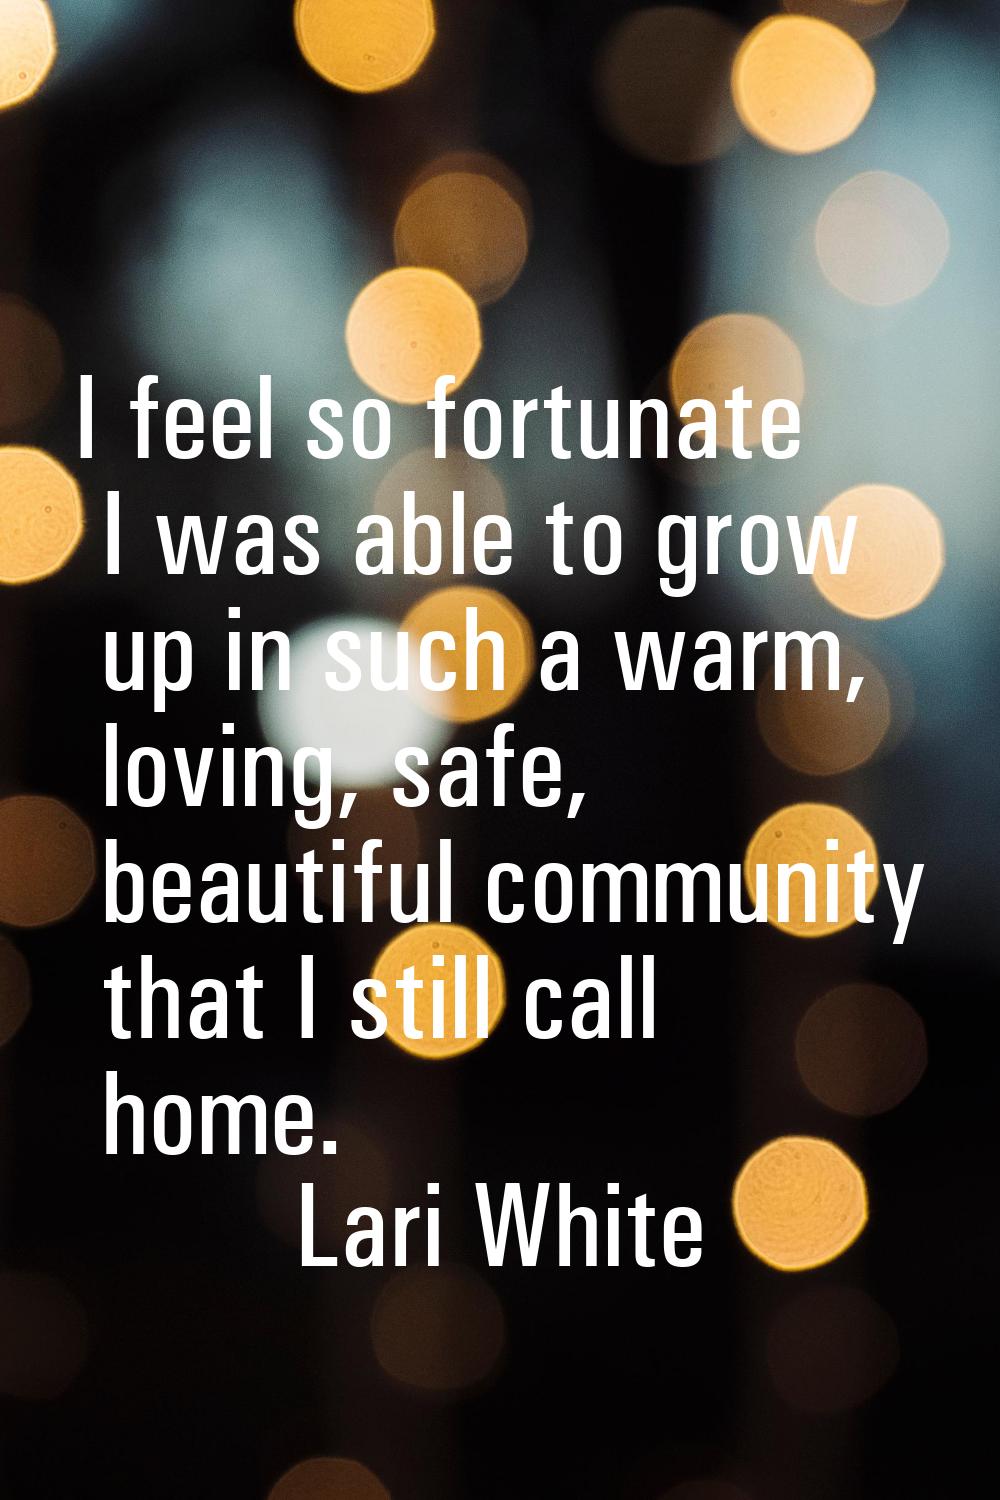 I feel so fortunate I was able to grow up in such a warm, loving, safe, beautiful community that I 